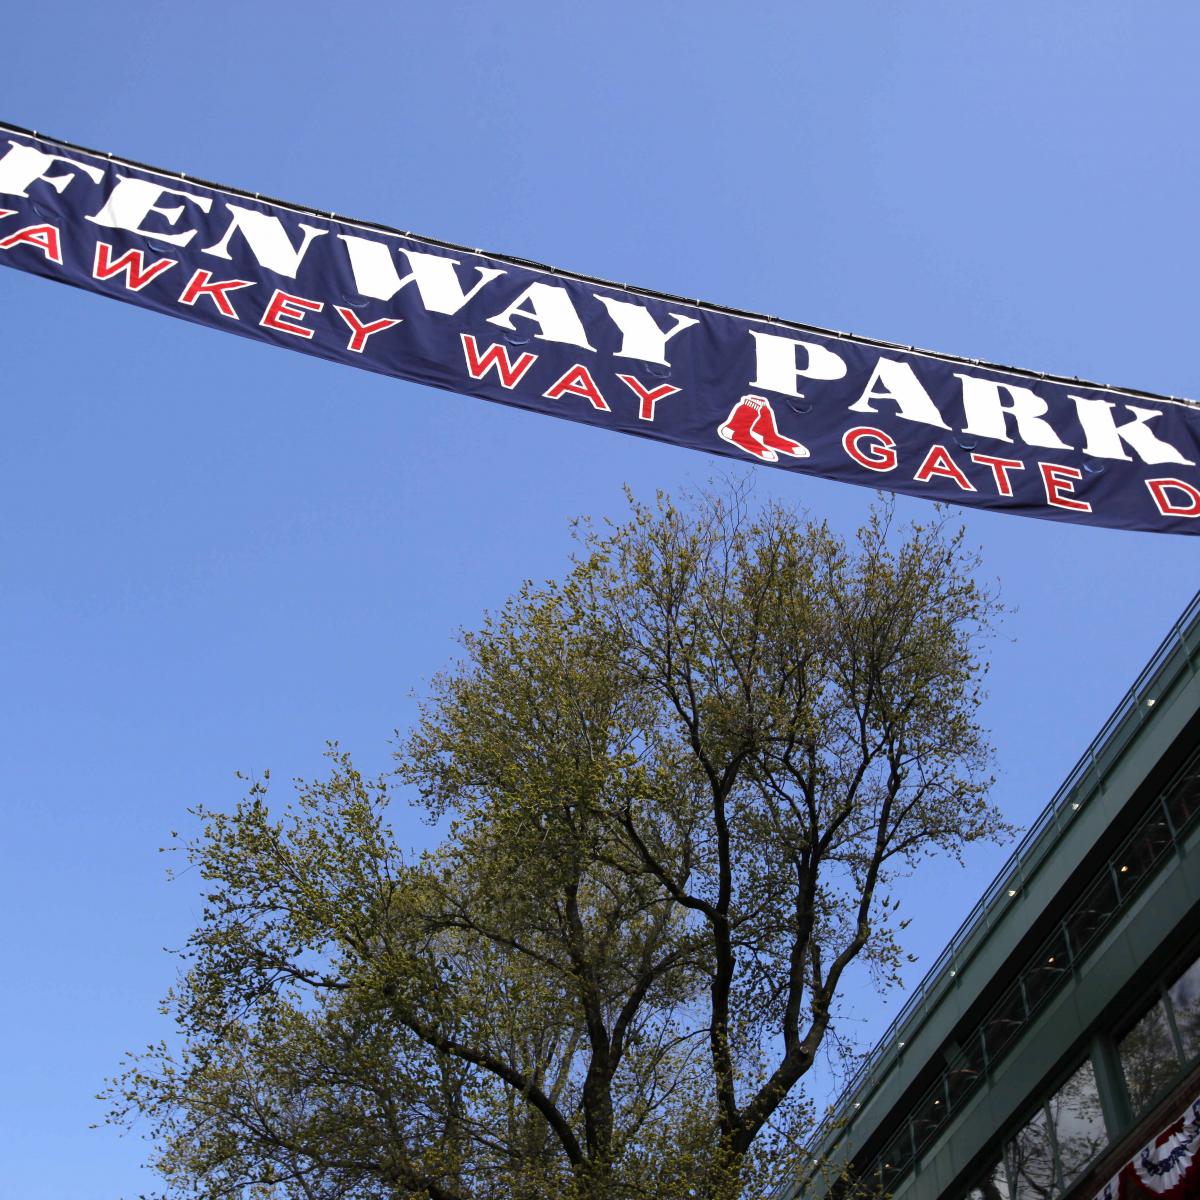 Red Sox ask to erase Yawkey Way from their address